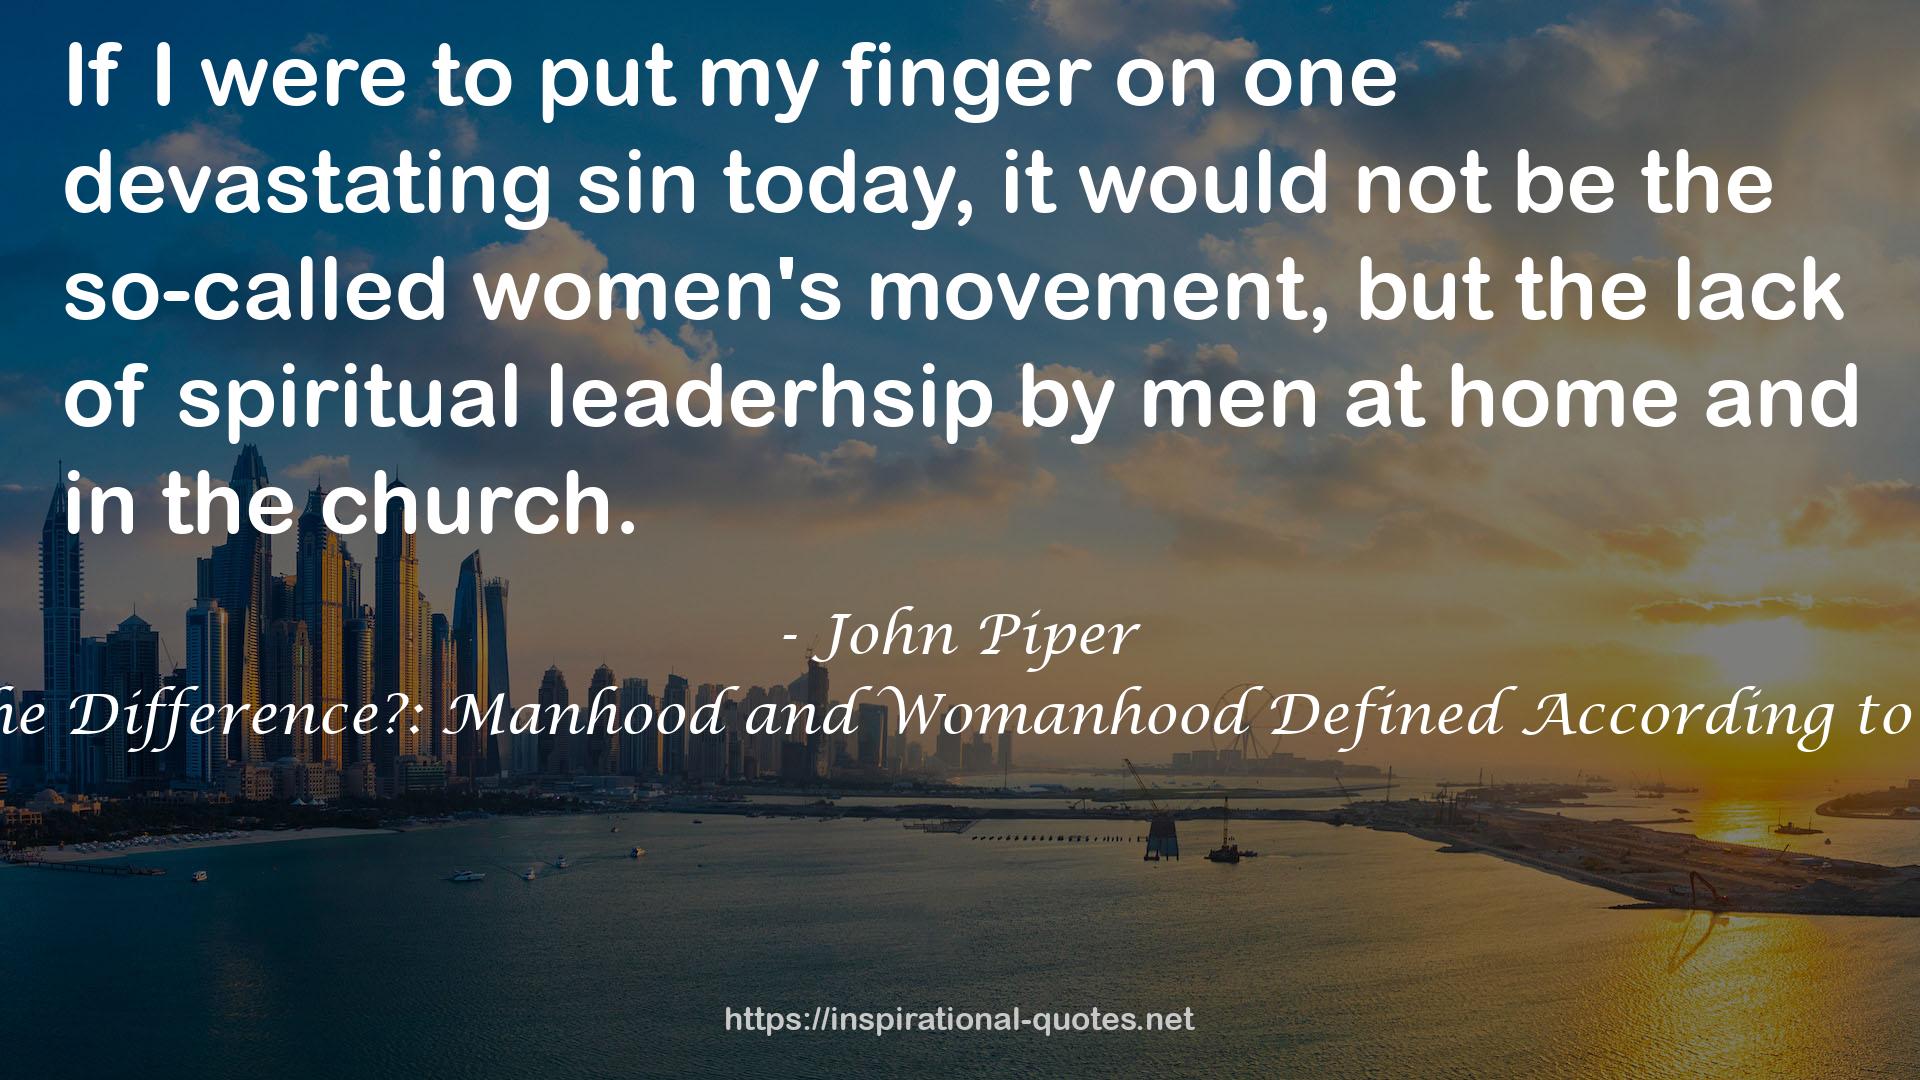 What's the Difference?: Manhood and Womanhood Defined According to the Bible QUOTES